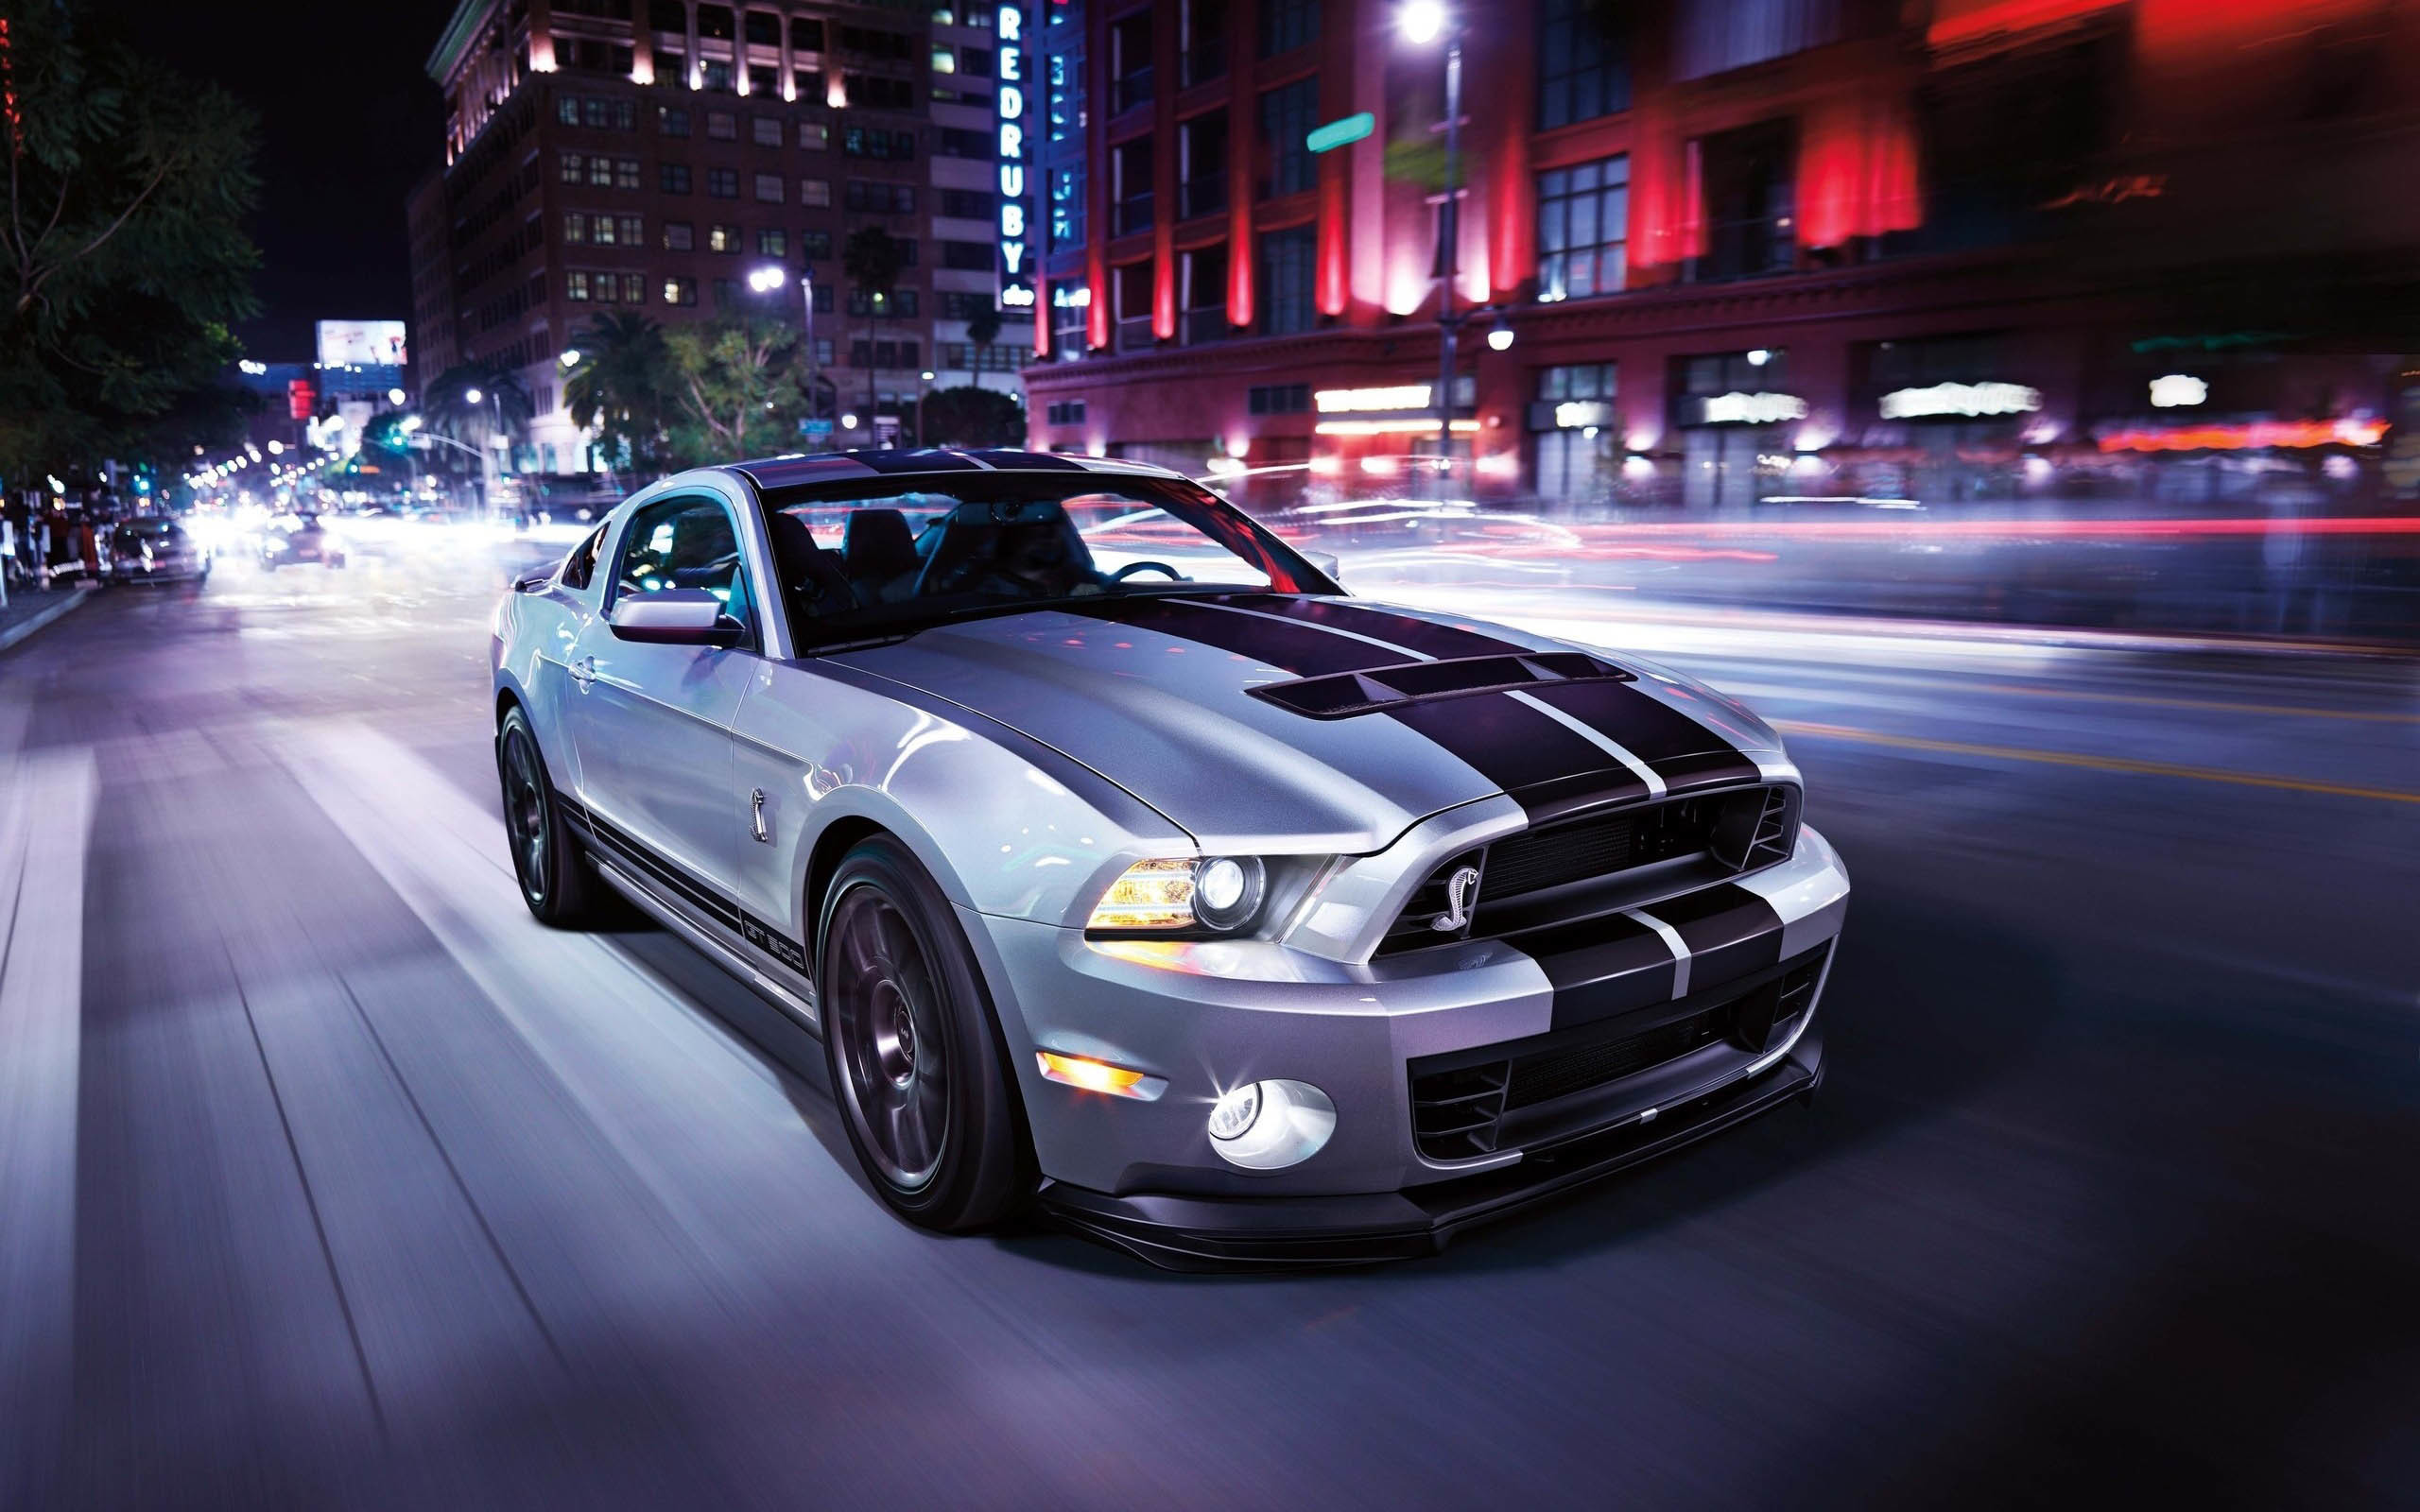 2560x1600 Ford Mustang Shelby Cobra GT500 at Night in the City  wallpaper